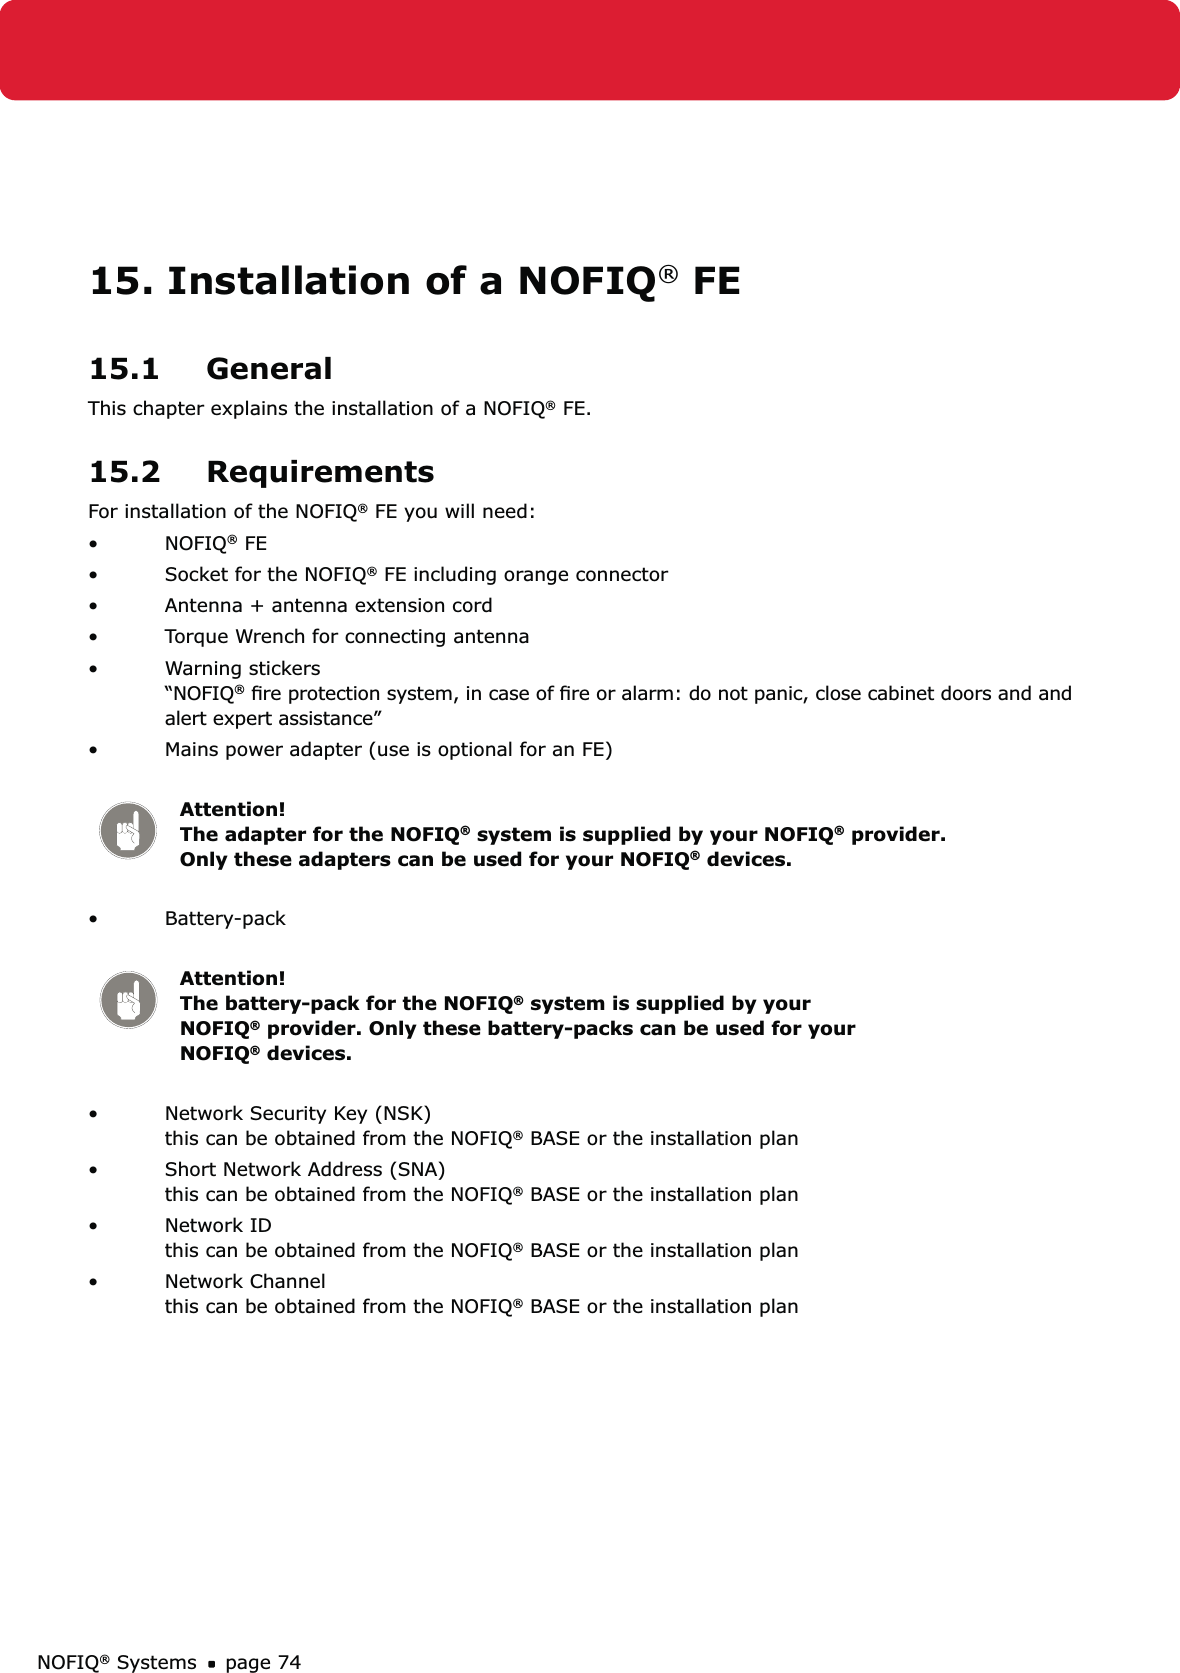 NOFIQ® Systems page 7415. Installation of a NOFIQ® FE15.1 GeneralThis chapter explains the installation of a NOFIQ® FE.15.2 RequirementsFor installation of the NOFIQ® FE you will need:NOFIQ•  ® FESocket for the NOFIQ•  ® FE including orange connectorAntenna + antenna extension cord • Torque Wrench for connecting antenna• Warning stickers    • “NOFIQ® ﬁre protection system, in case of ﬁre or alarm: do not panic, close cabinet doors and and alert expert assistance”Mains power adapter (use is optional for an FE) • Attention!   The adapter for the NOFIQ® system is supplied by your NOFIQ® provider. Only these adapters can be used for your NOFIQ® devices.Battery-pack  • Attention!   The battery-pack for the NOFIQ® system is supplied by your NOFIQ® provider. Only these battery-packs can be used for your NOFIQ® devices.Network Security Key (NSK)  • this can be obtained from the NOFIQ® BASE or the installation planShort Network Address (SNA) • this can be obtained from the NOFIQ® BASE or the installation planNetwork ID • this can be obtained from the NOFIQ® BASE or the installation planNetwork Channel • this can be obtained from the NOFIQ® BASE or the installation plan